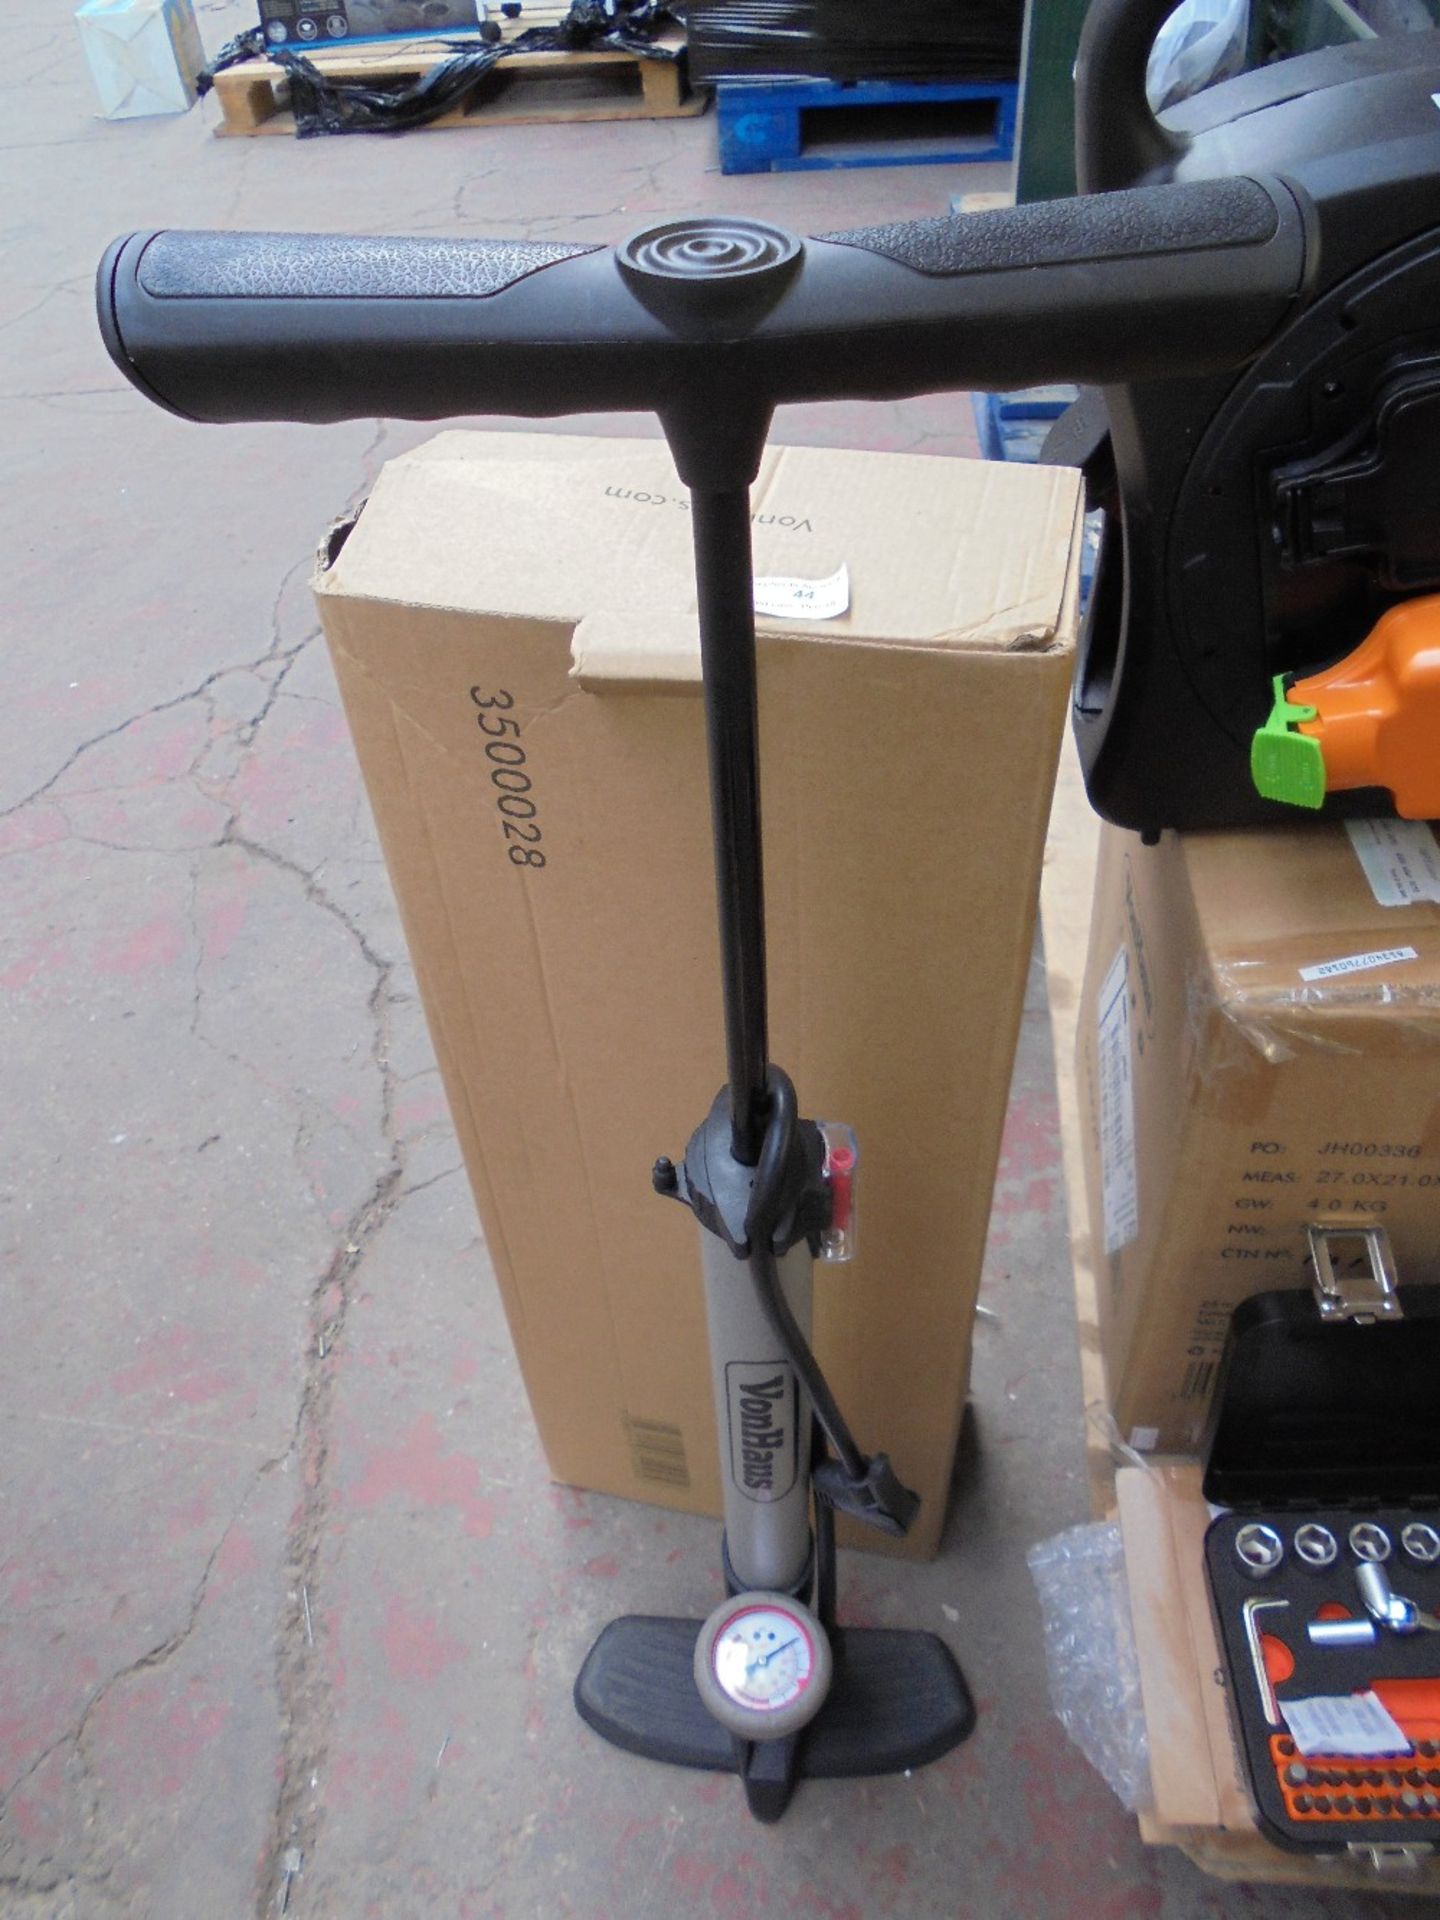 Upright Bike Pump new & boxed  Please note by Bidding on this item you agree to the following